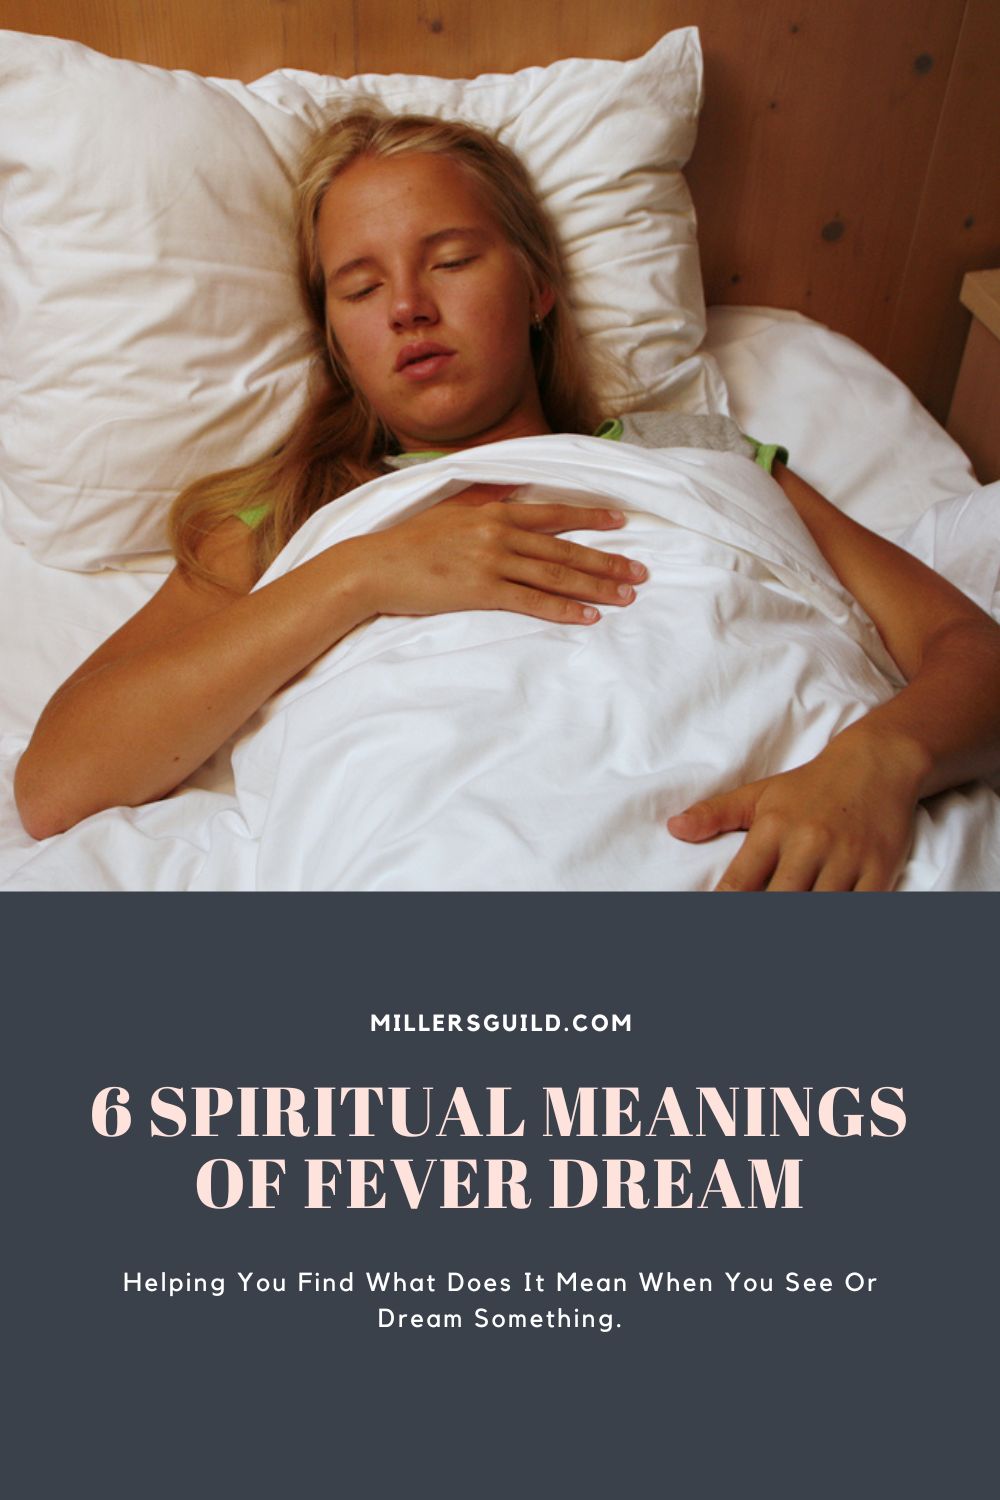 What Does A Fever Dream Mean?